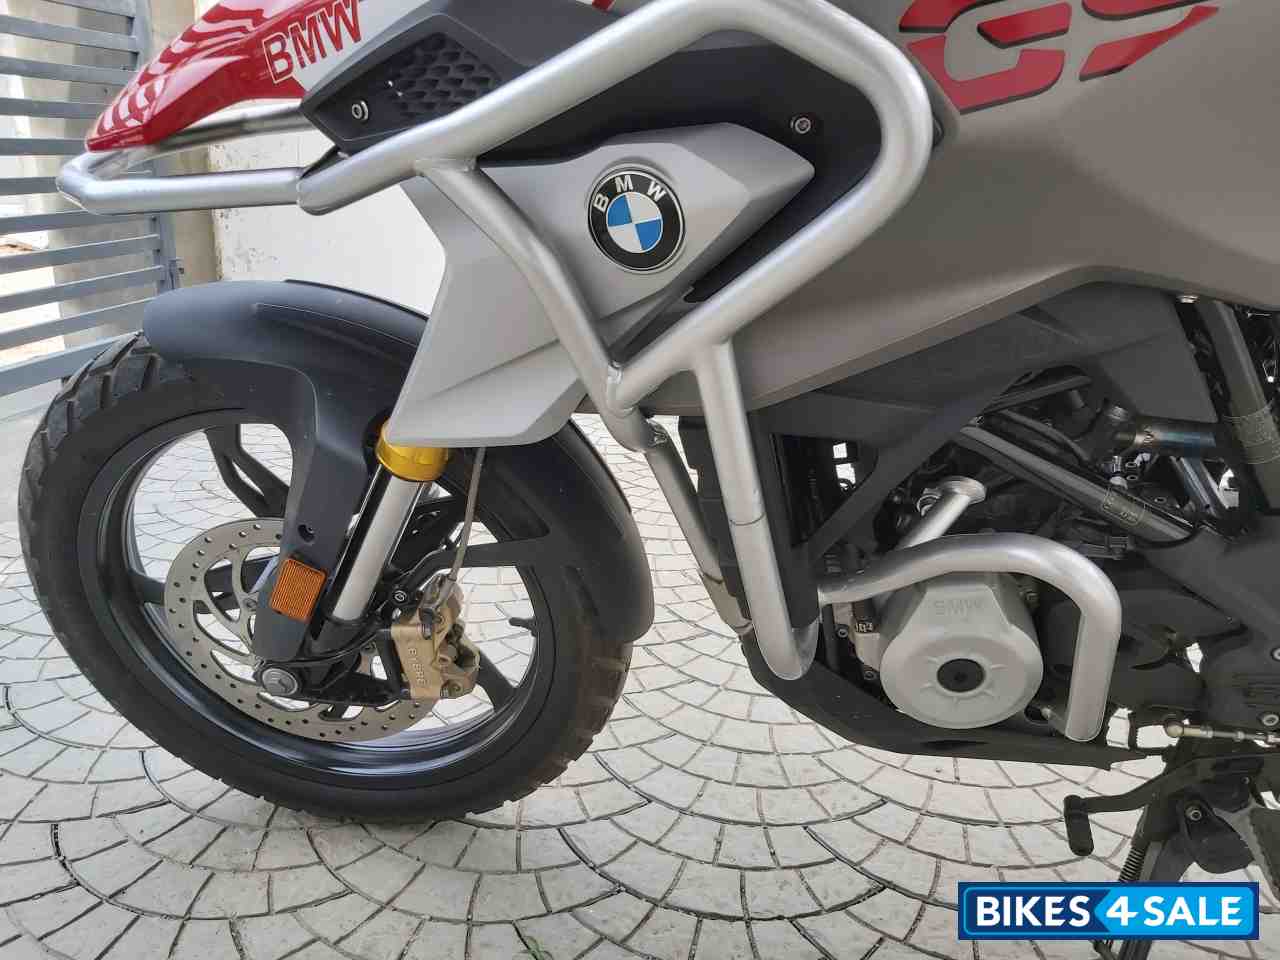 Used 19 Model Bmw G 310 Gs For Sale In Trivandrum Id Racing Red Colour Bikes4sale